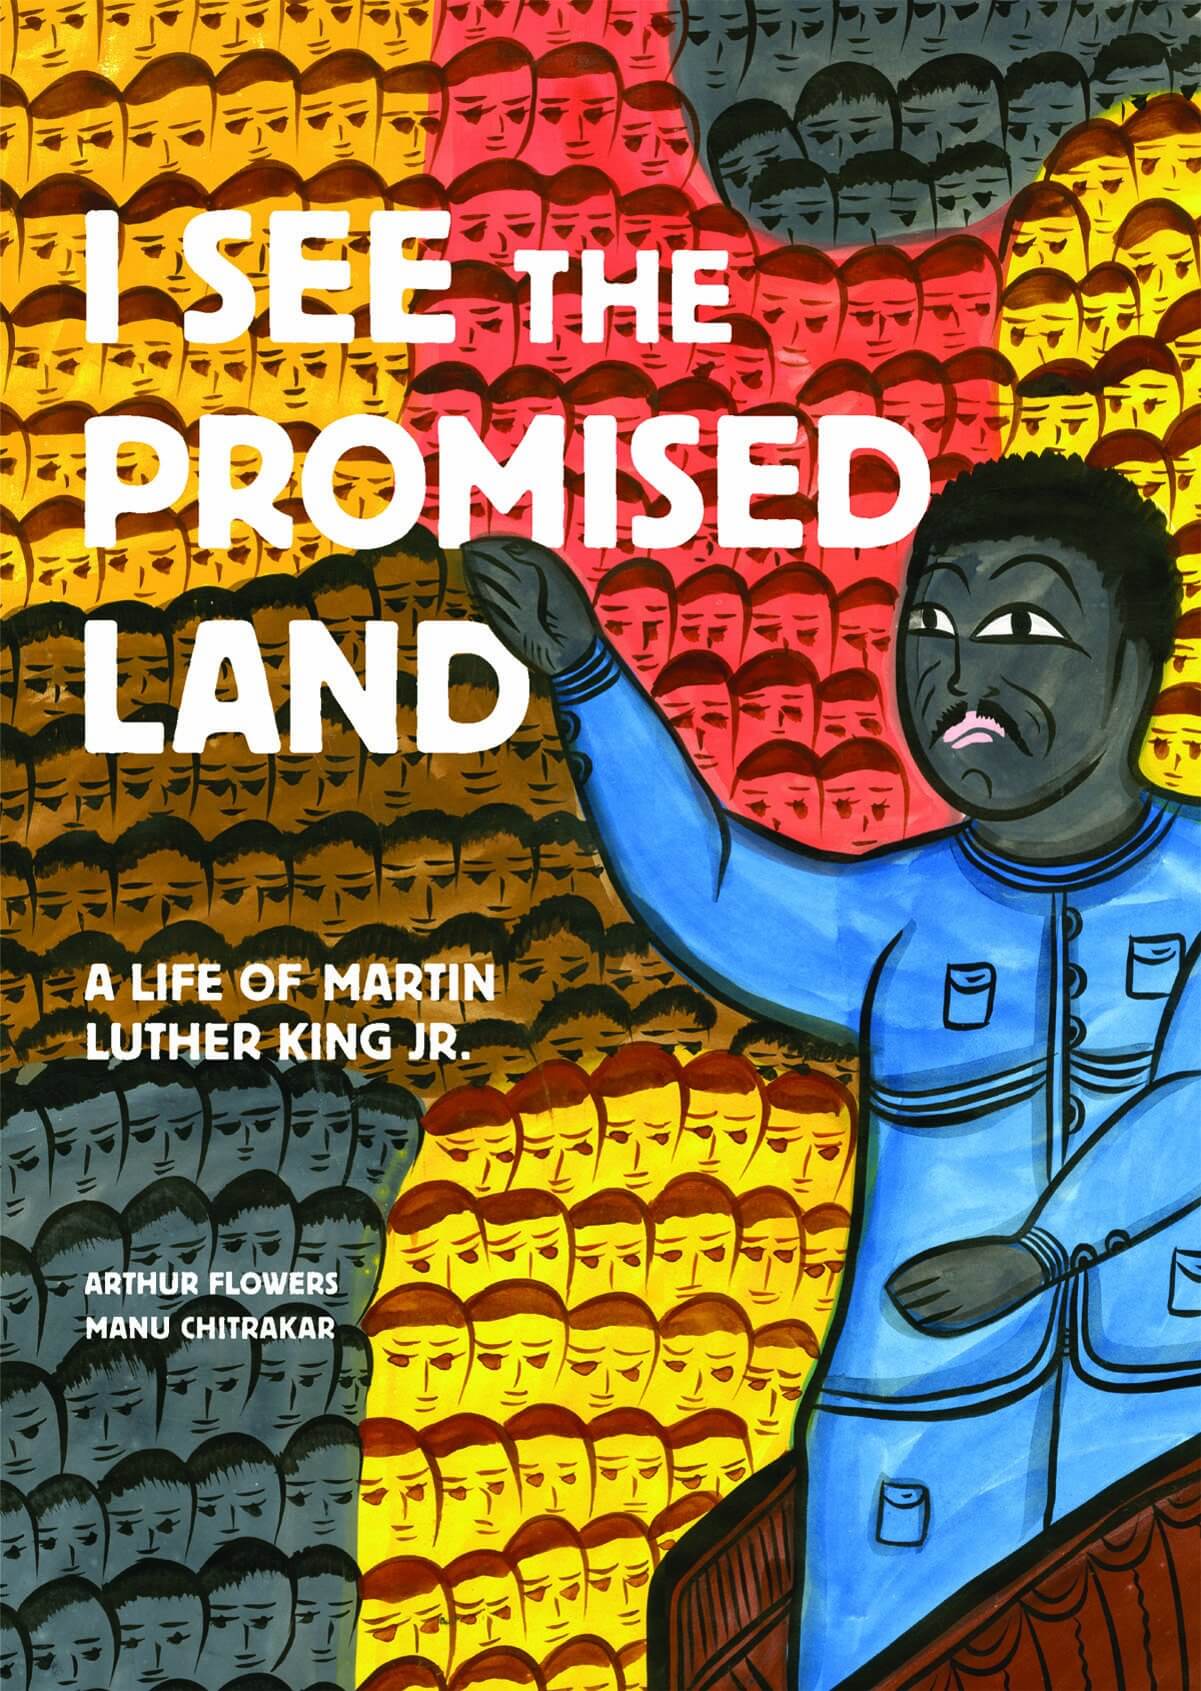 I See the Promised Land: A Life of Martin Luther King Jr. by Arthur Flowers ...